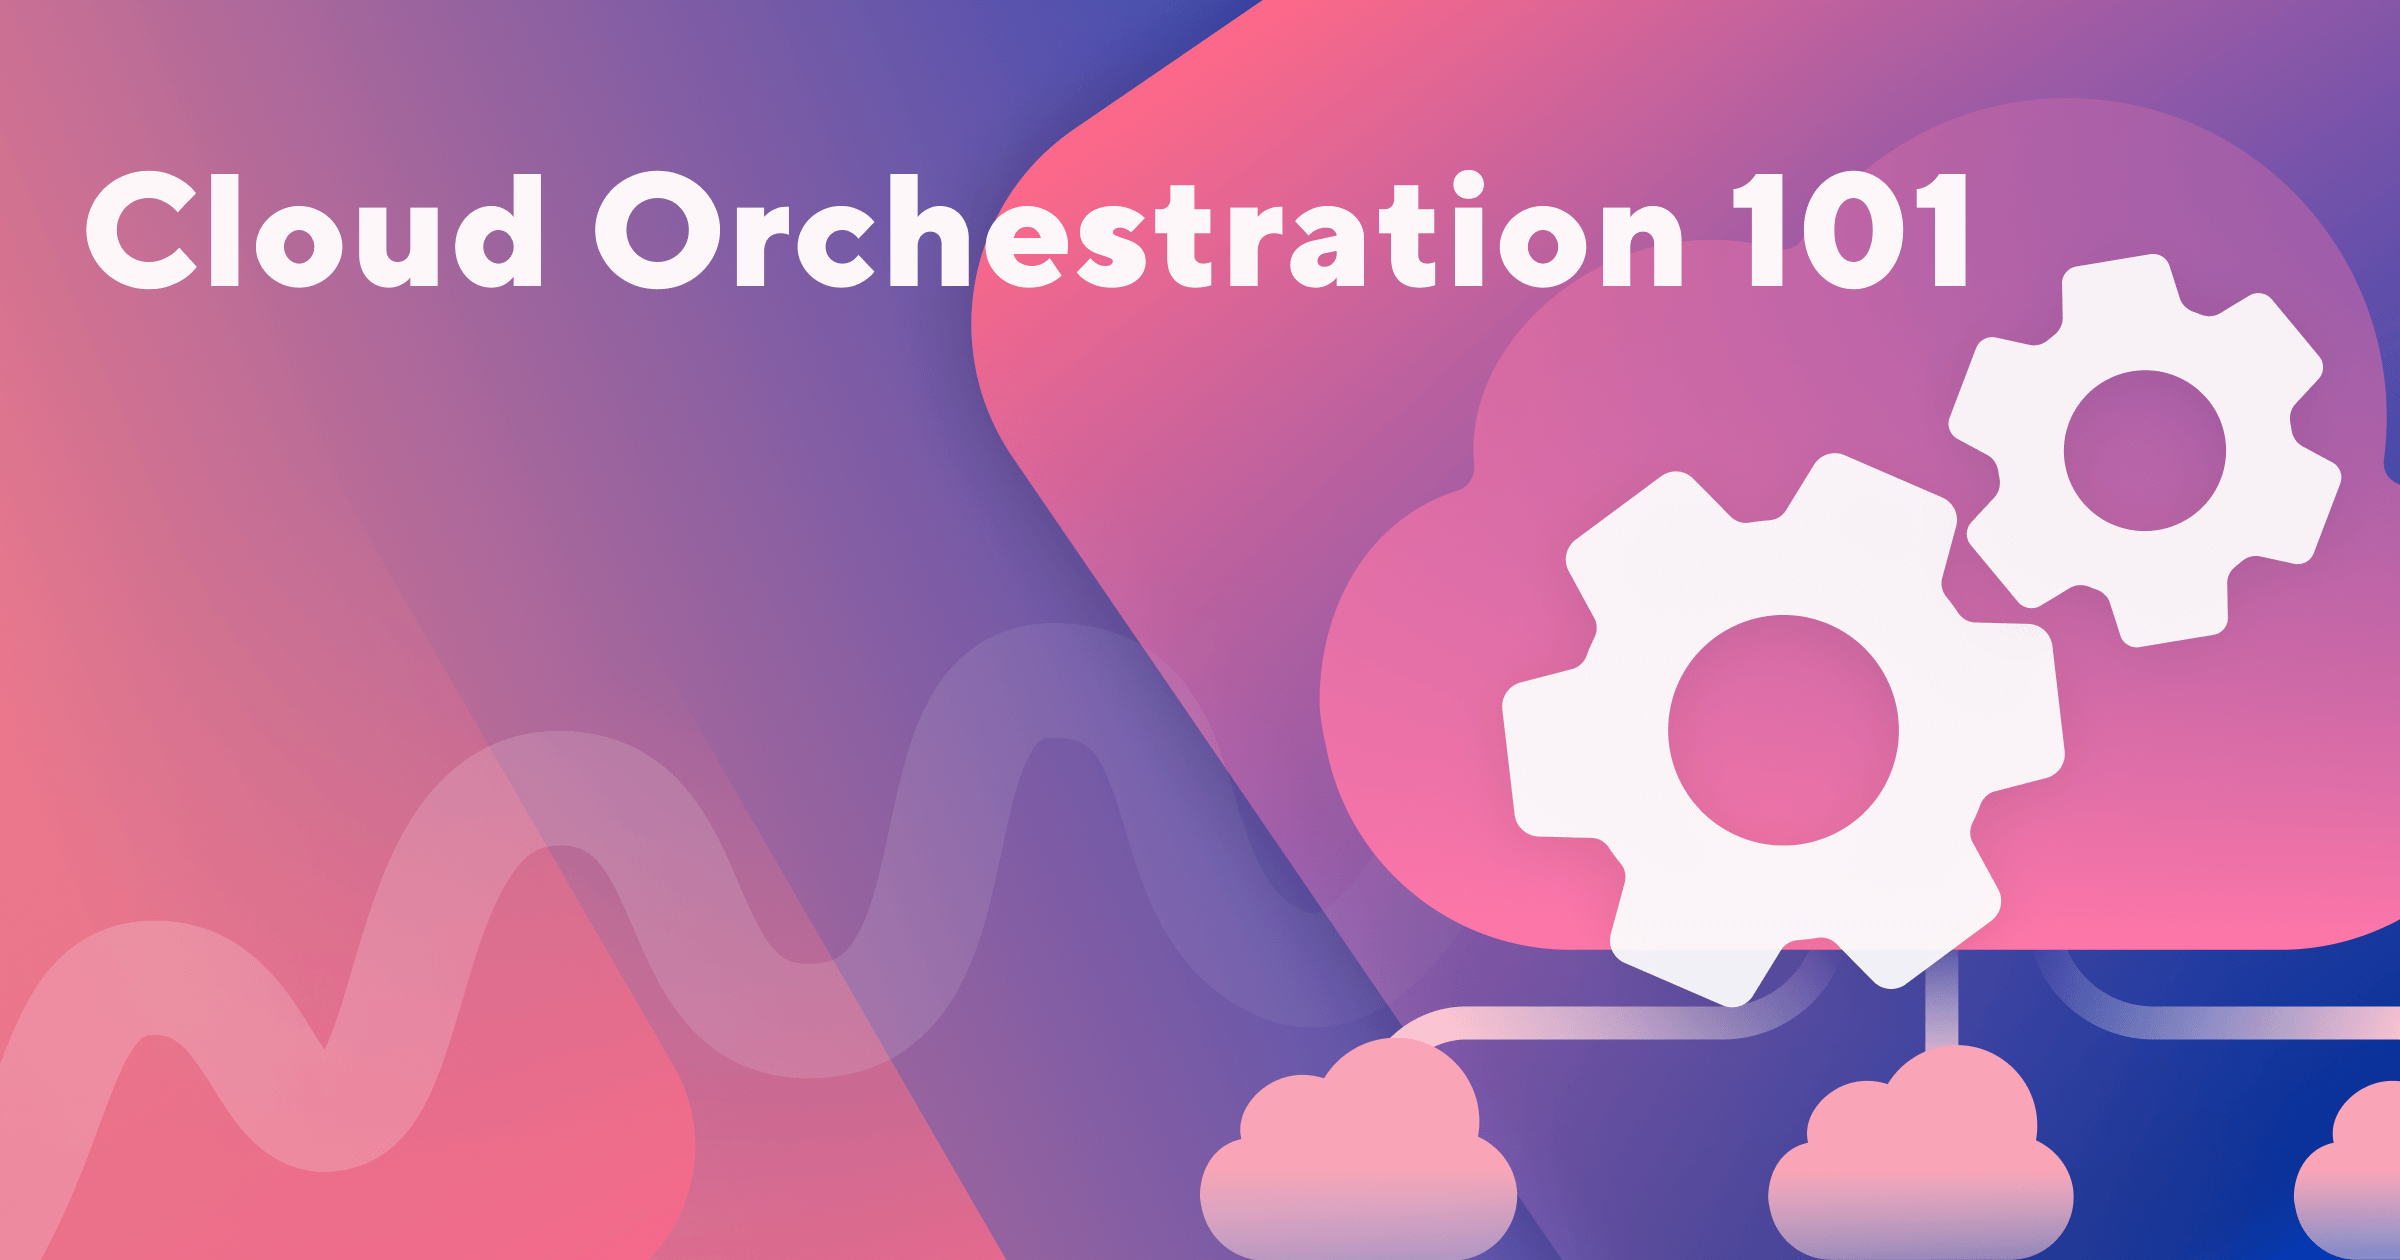 Cloud Orchestration 101 | A Complete Guide for Beginners